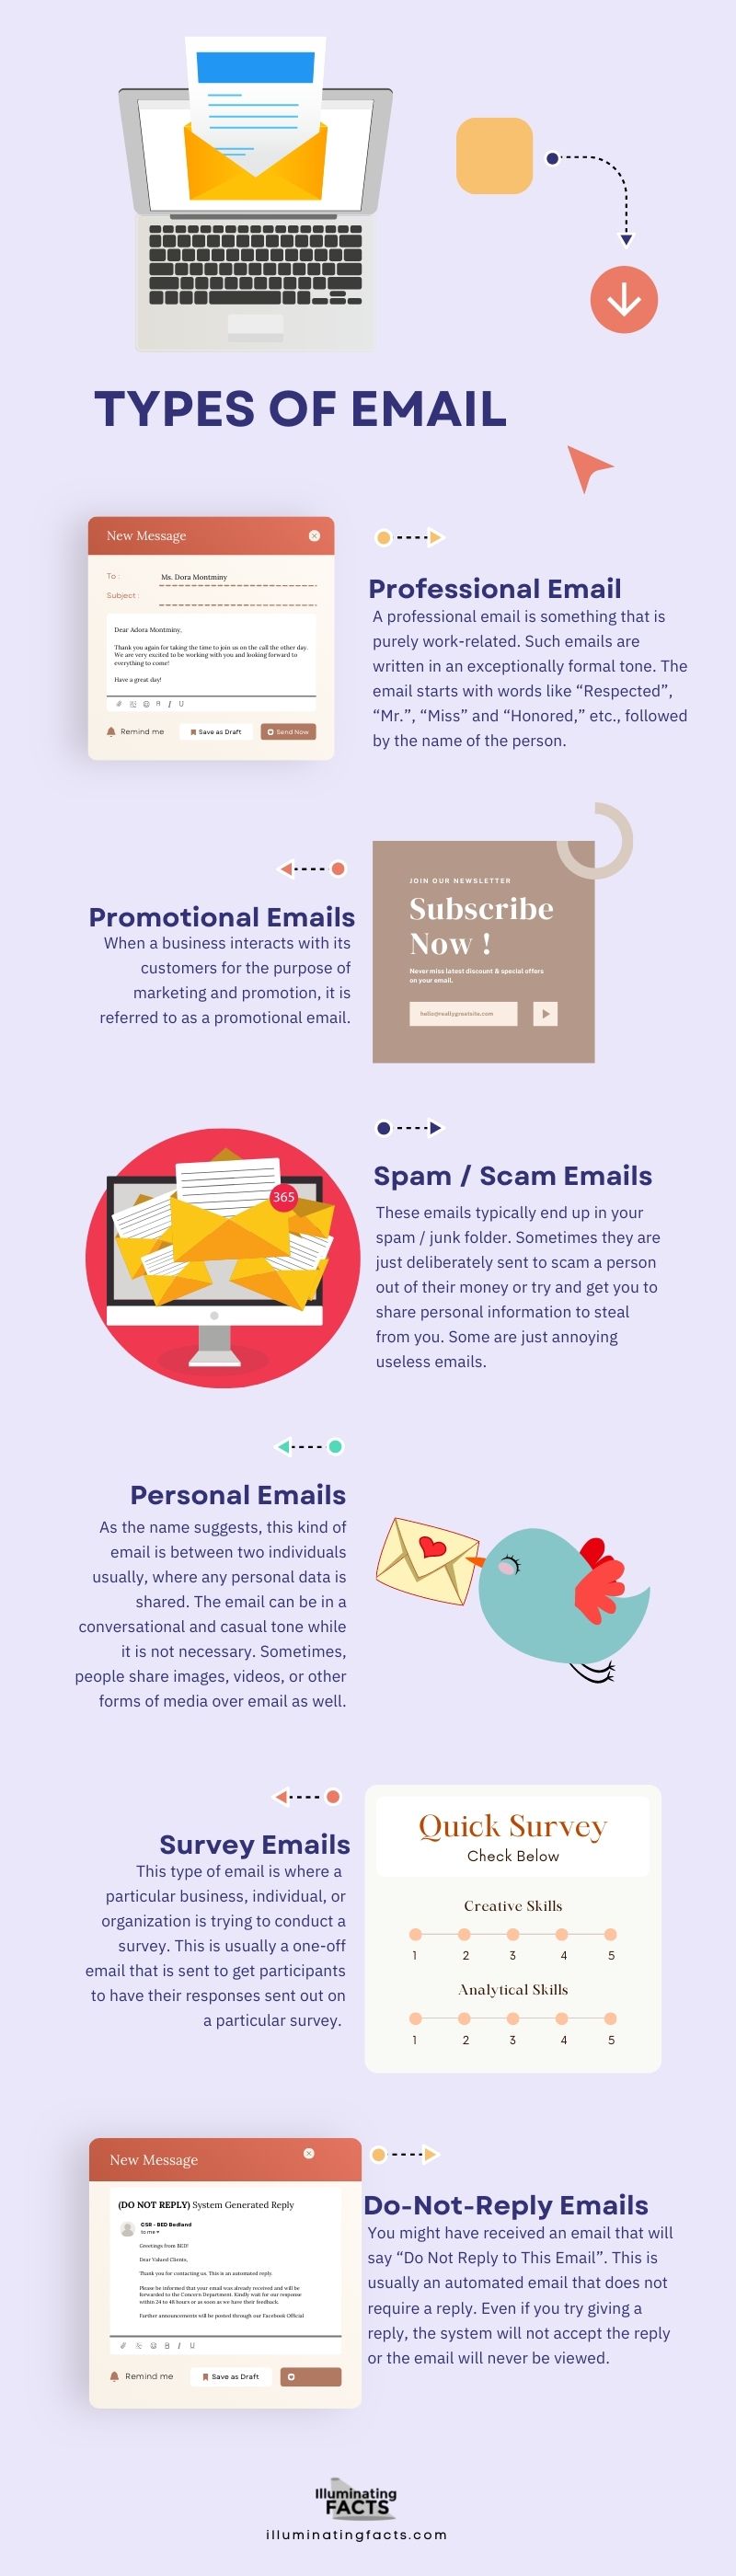 Types of Email